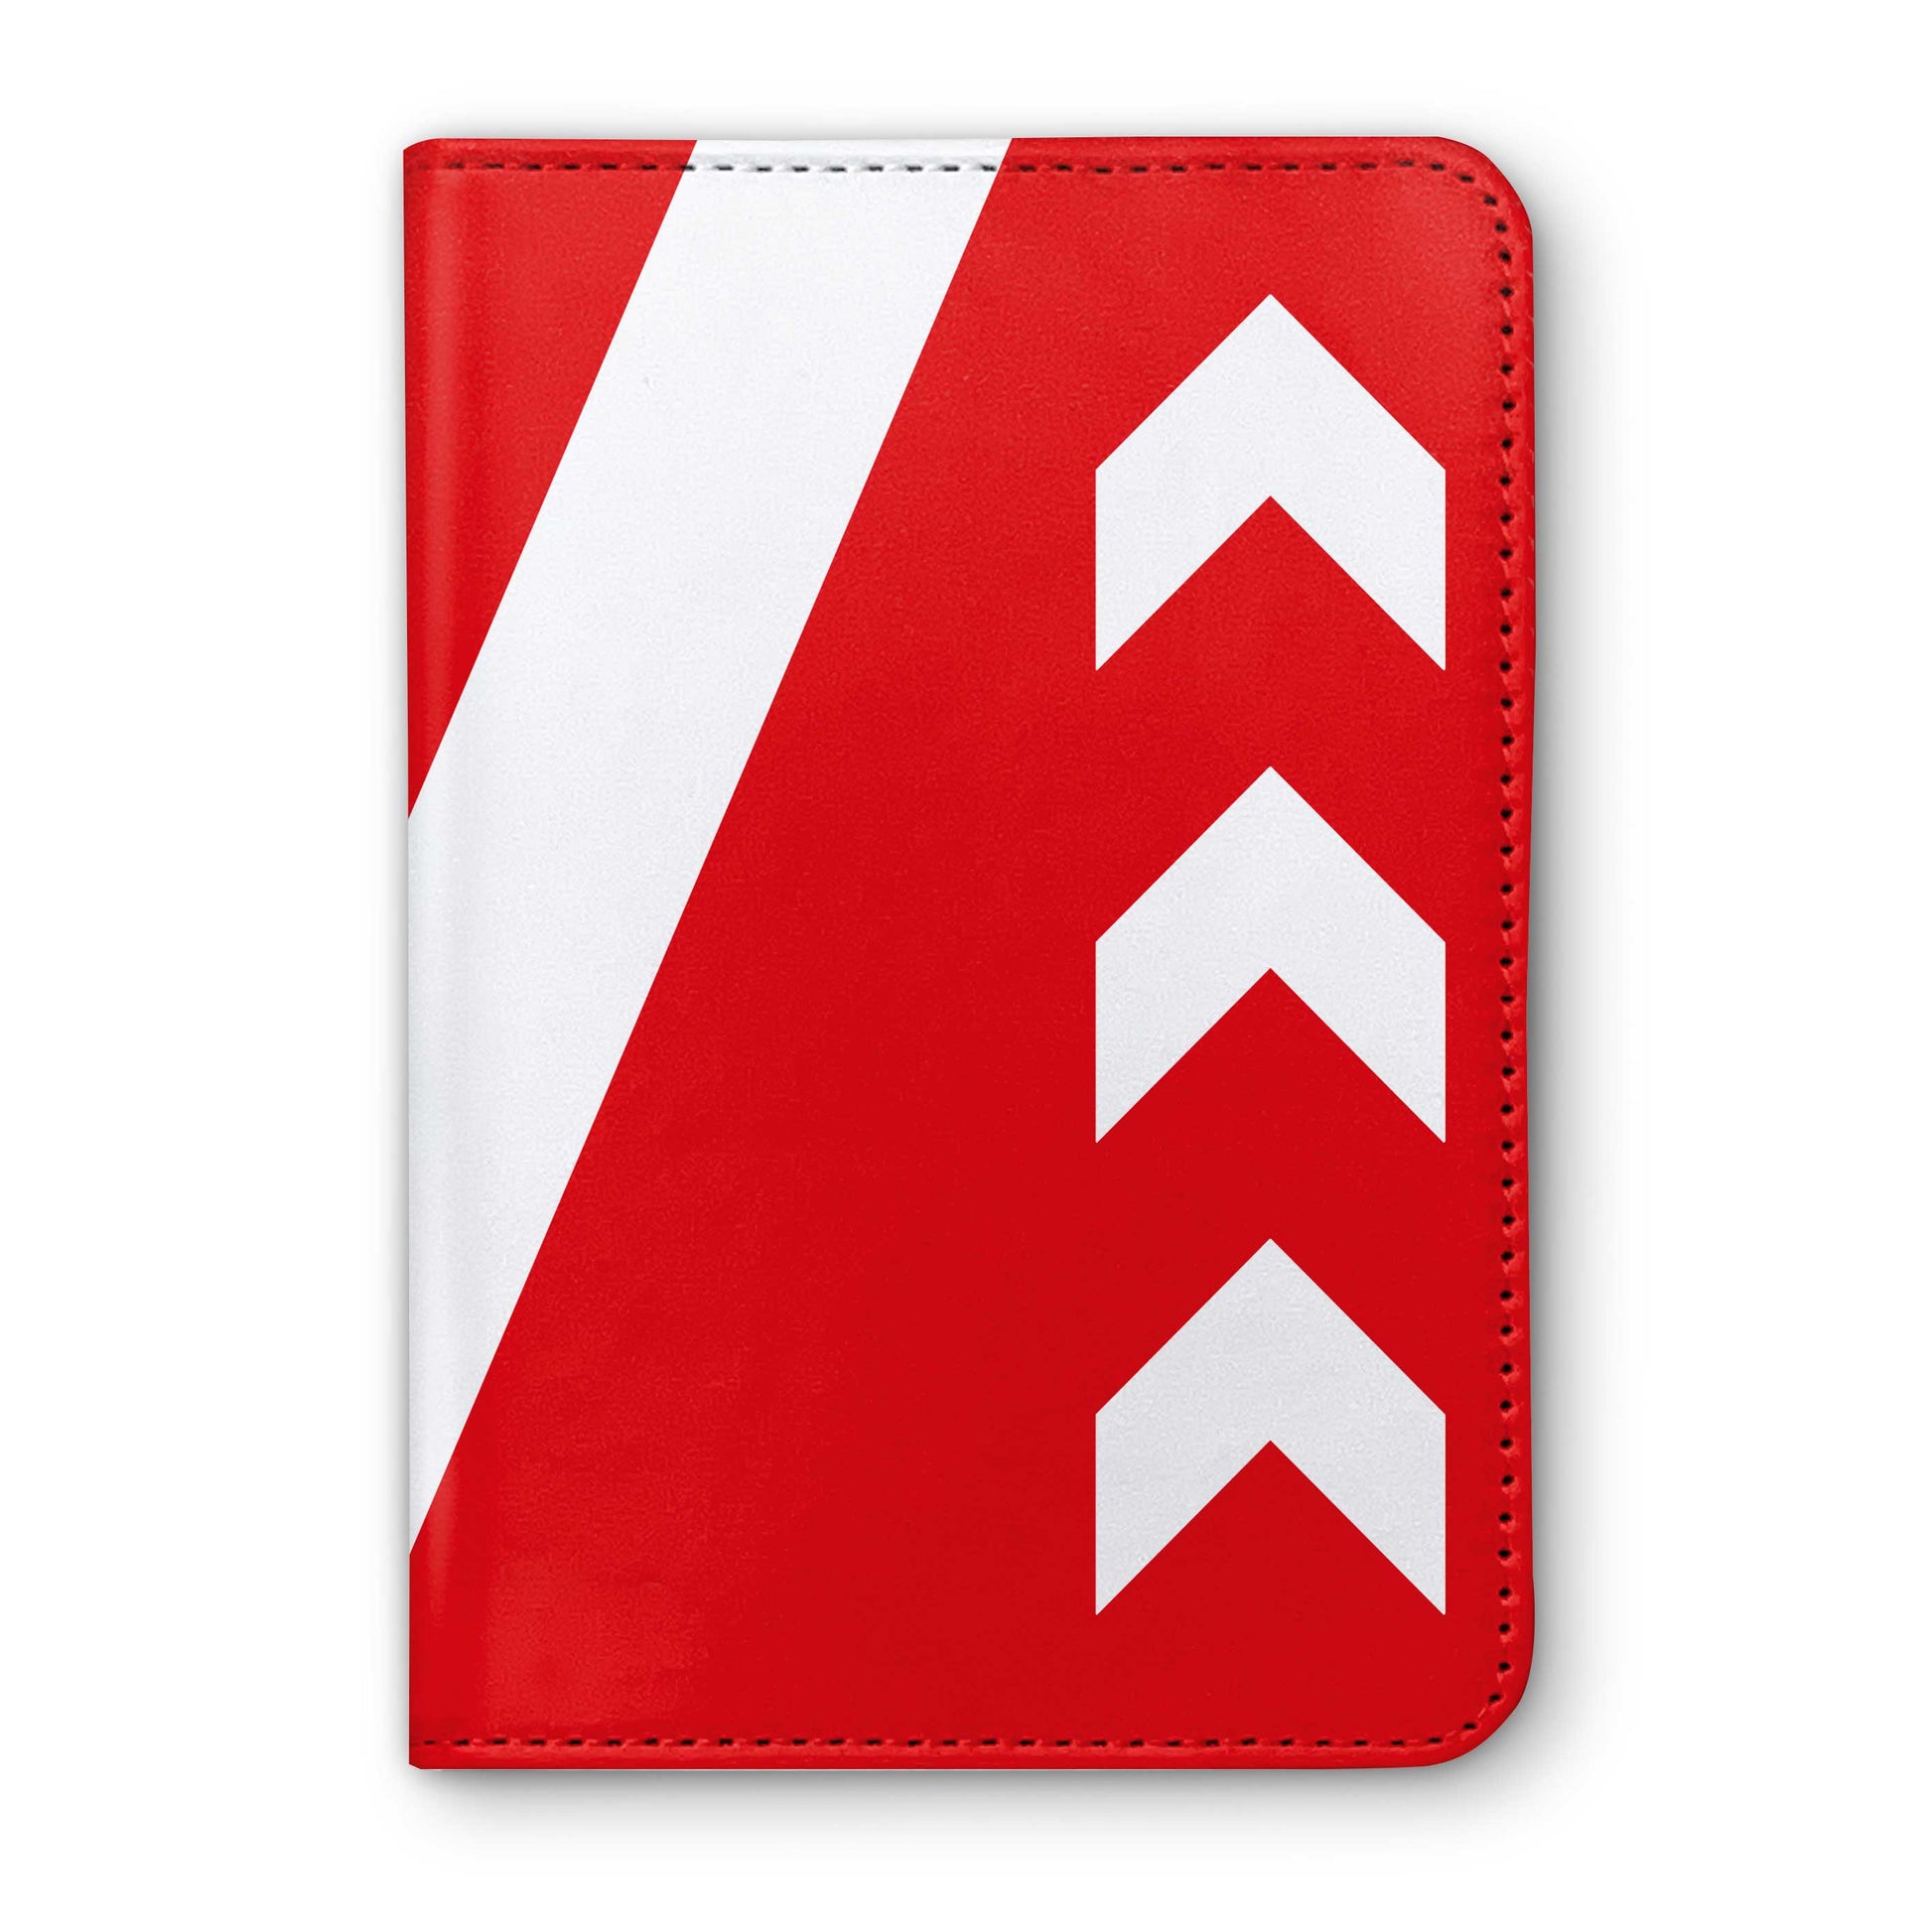 Slaneyville Syndicate Horse Racing Passport Holder - Hacked Up Horse Racing Gifts